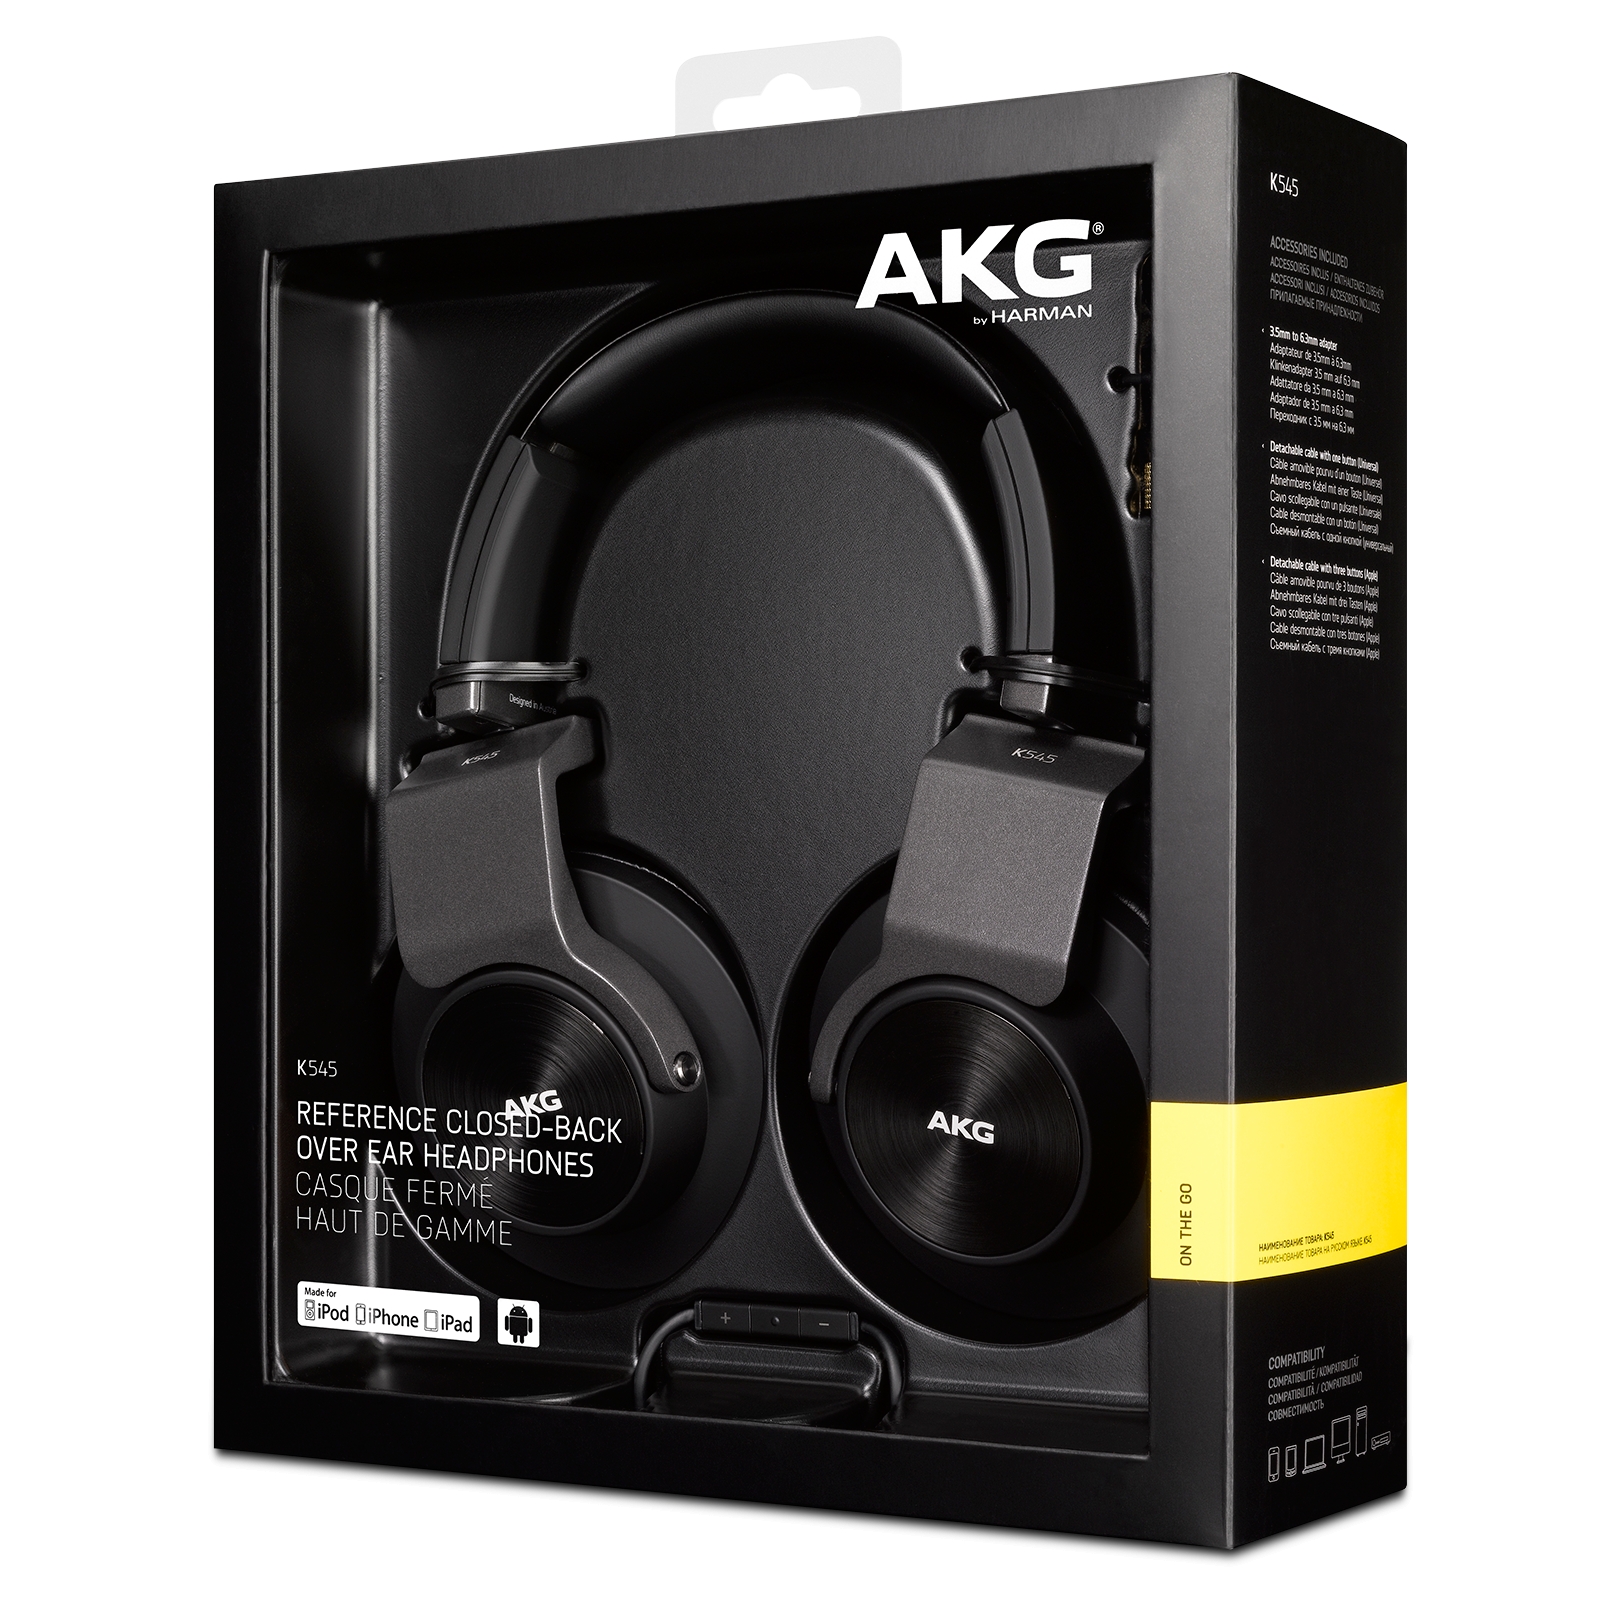 K 545 | High performance over-ear headphones with microphone and 